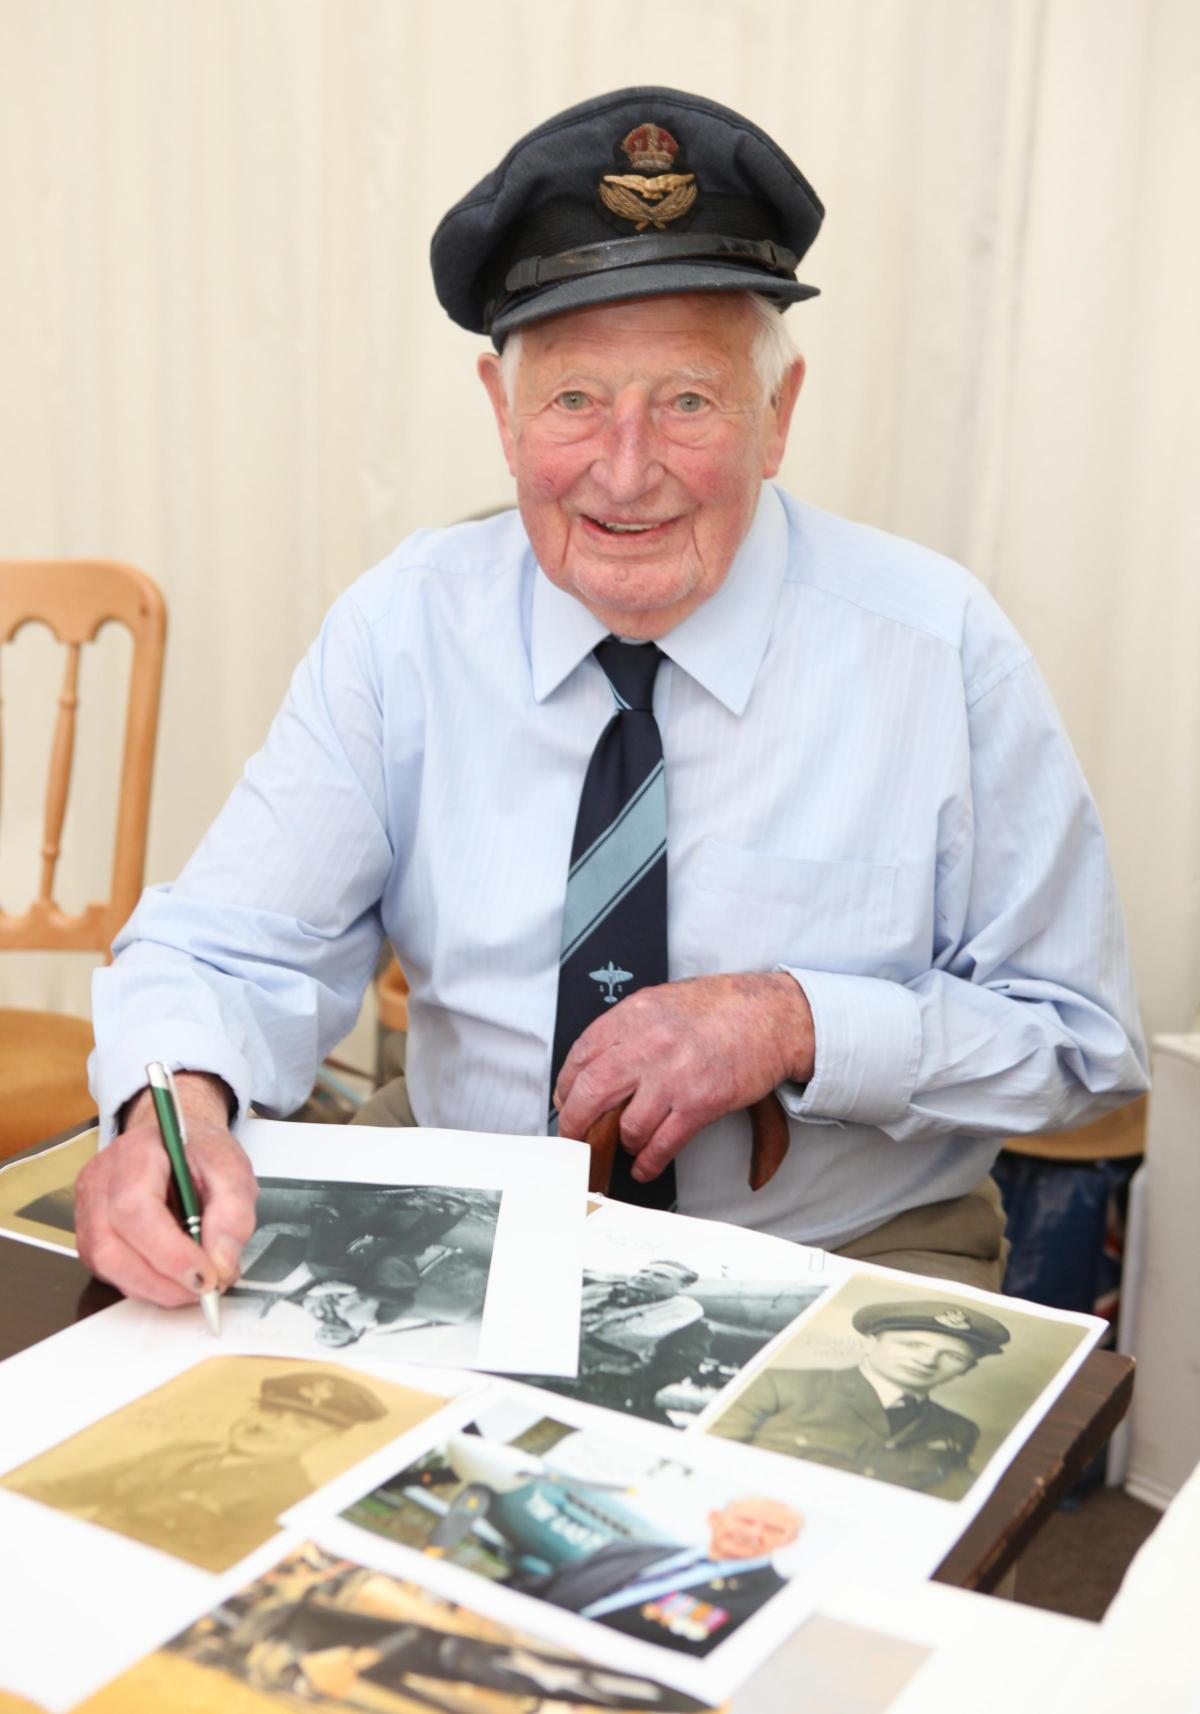 Dennis Keep who was a Spitfire pilot in the war with some pictures of himself